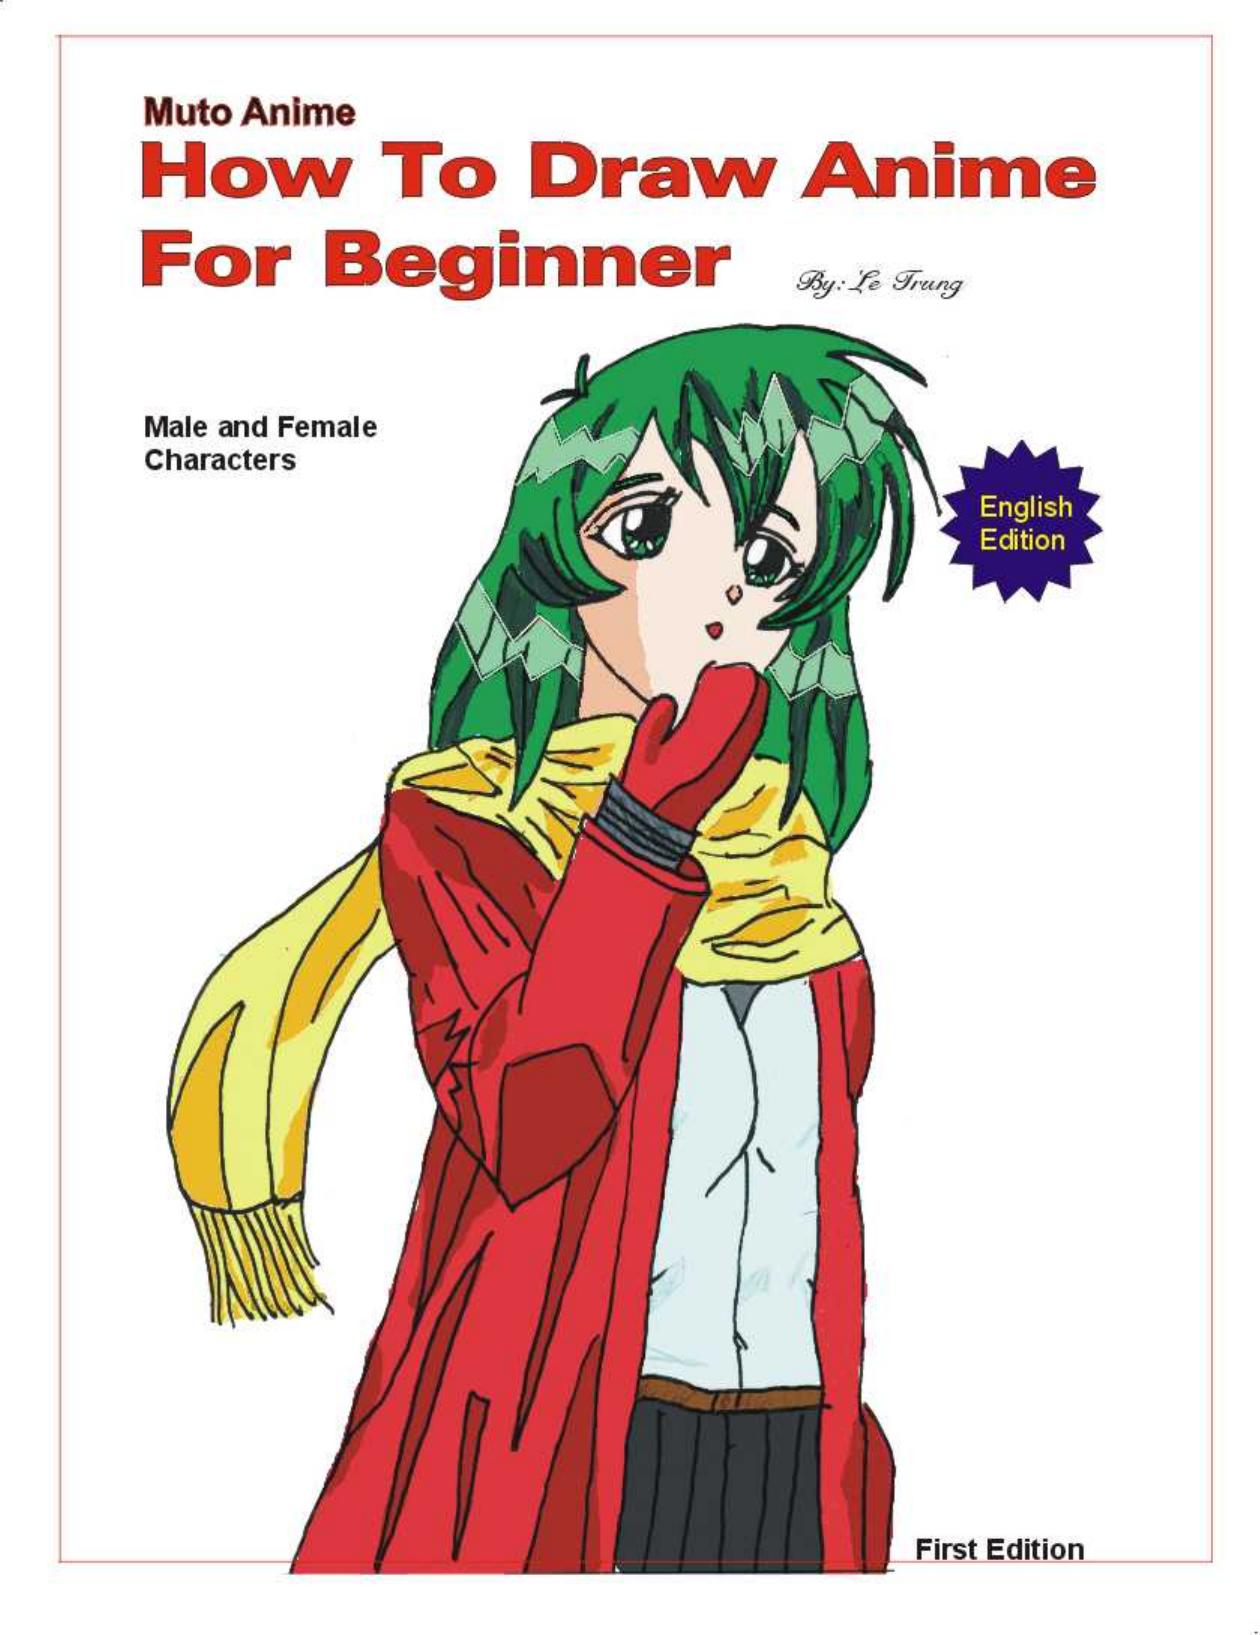 How to Draw Anime For Beginners 2004